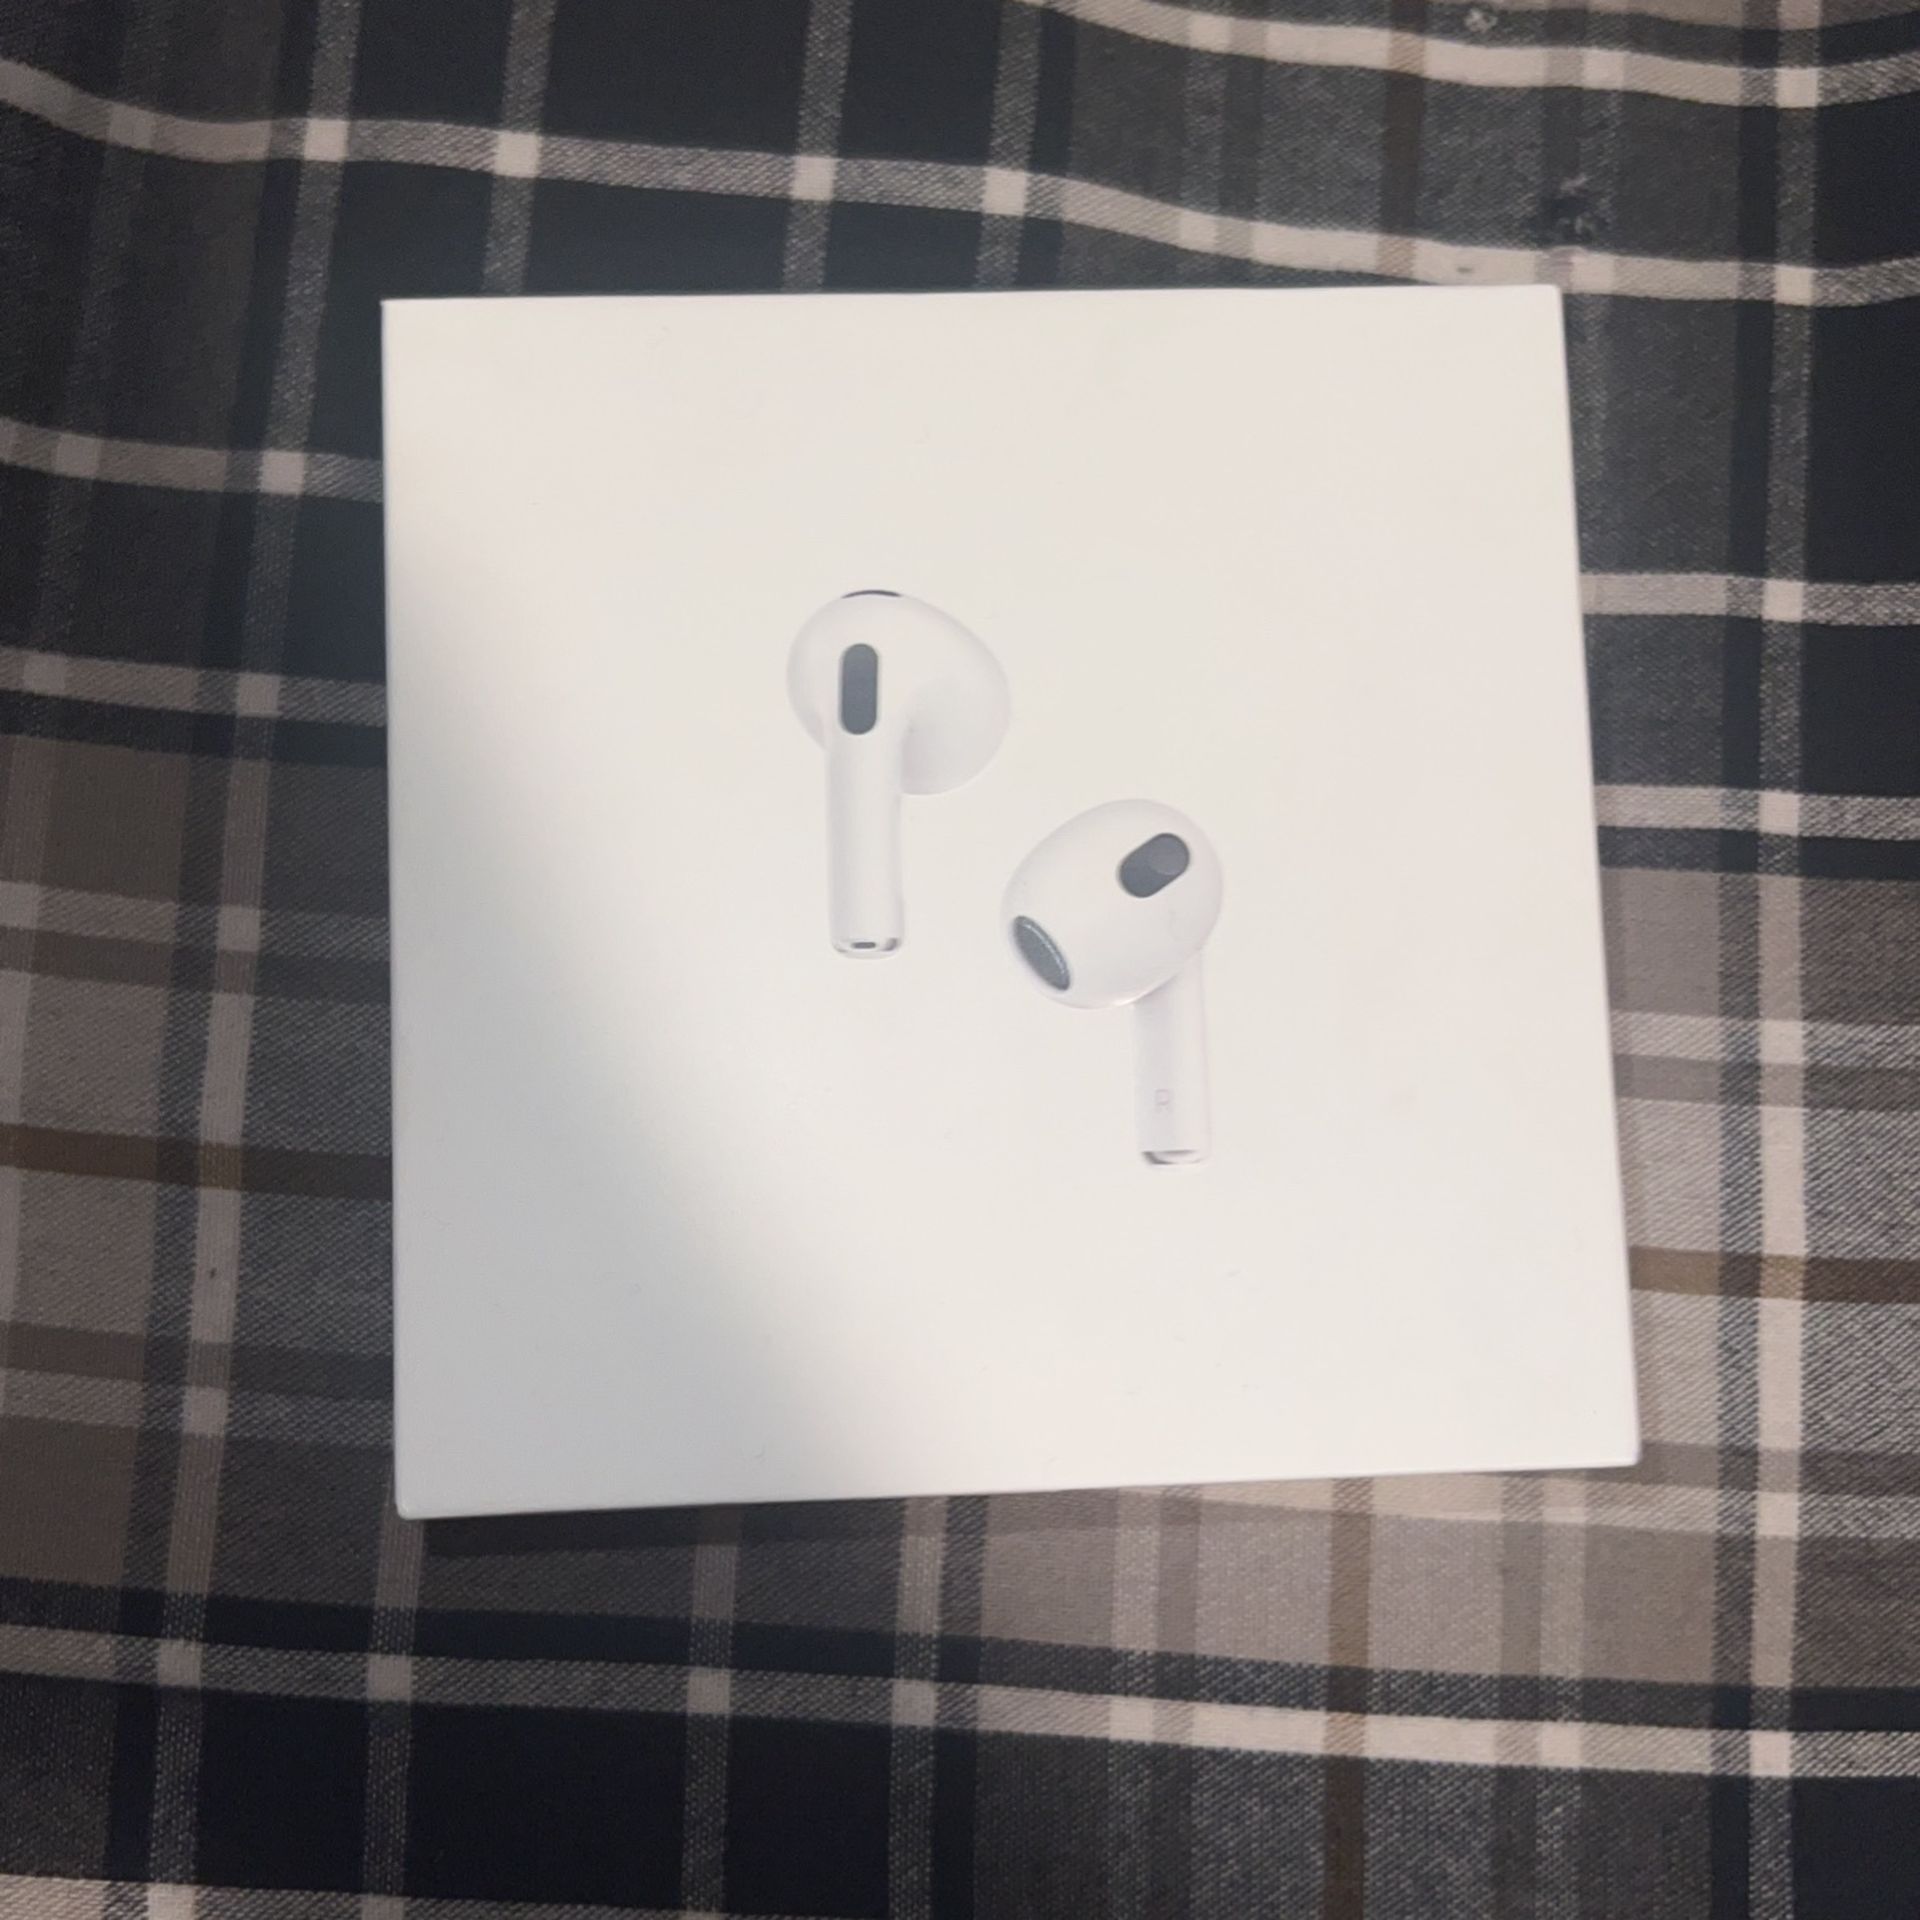 AIRPODS 3rd Generation